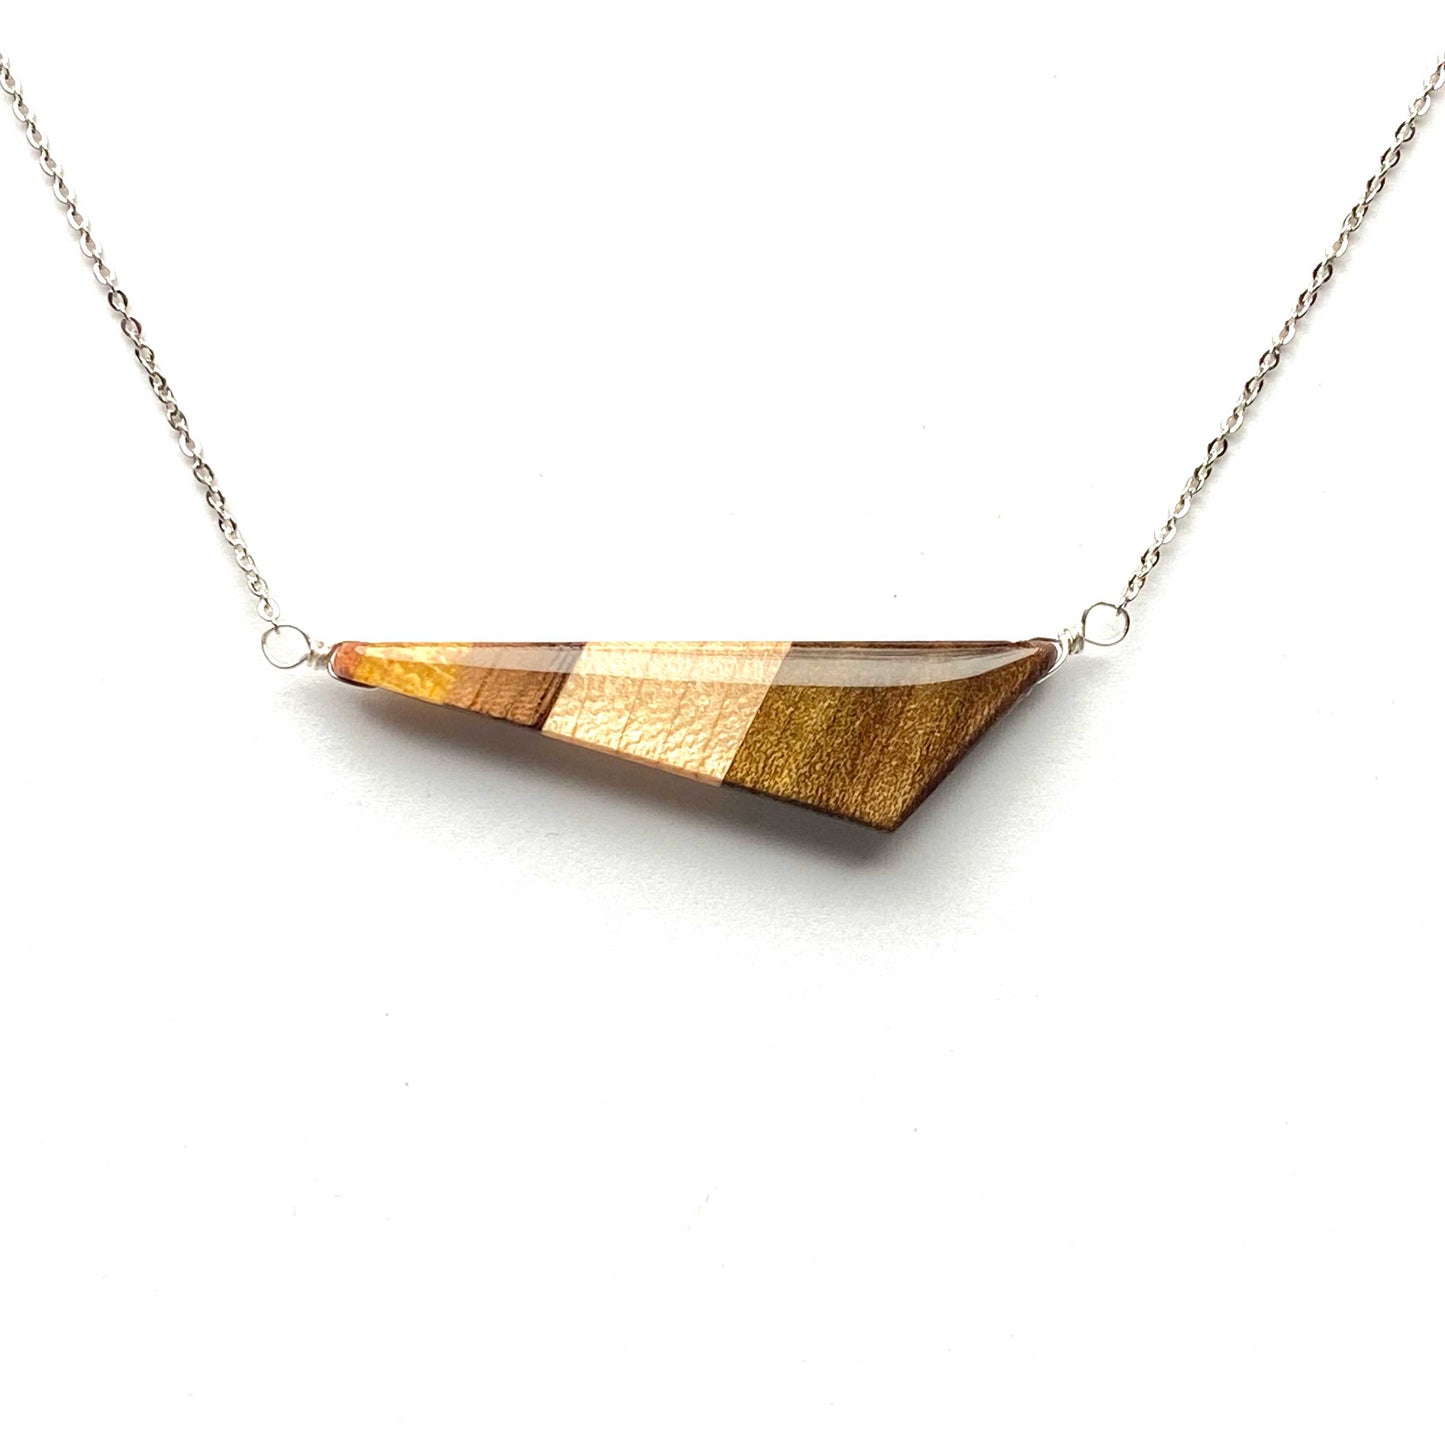 Horizontal Triangle Reclaimed Wood Necklace